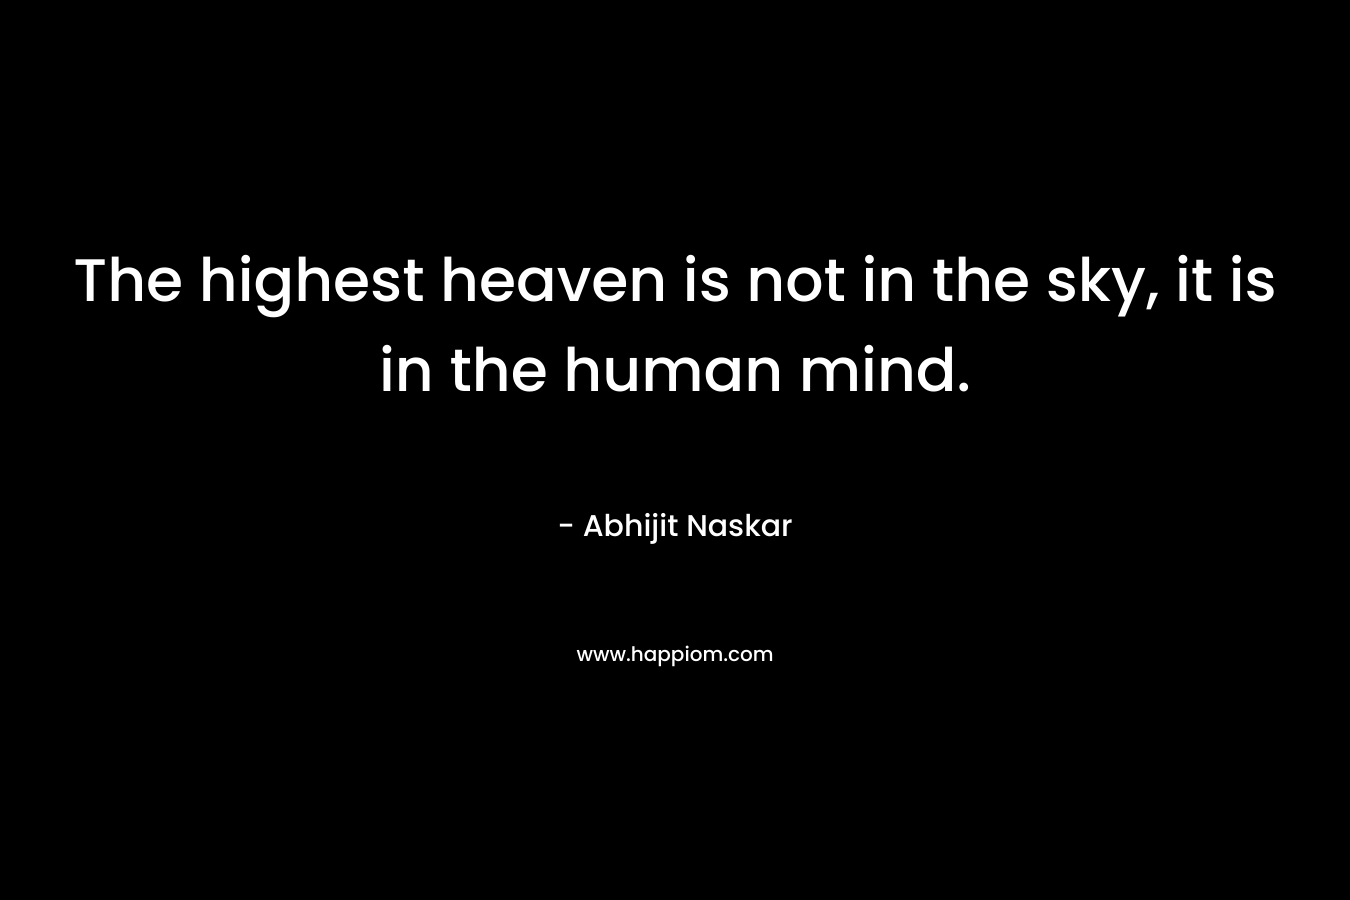 The highest heaven is not in the sky, it is in the human mind.